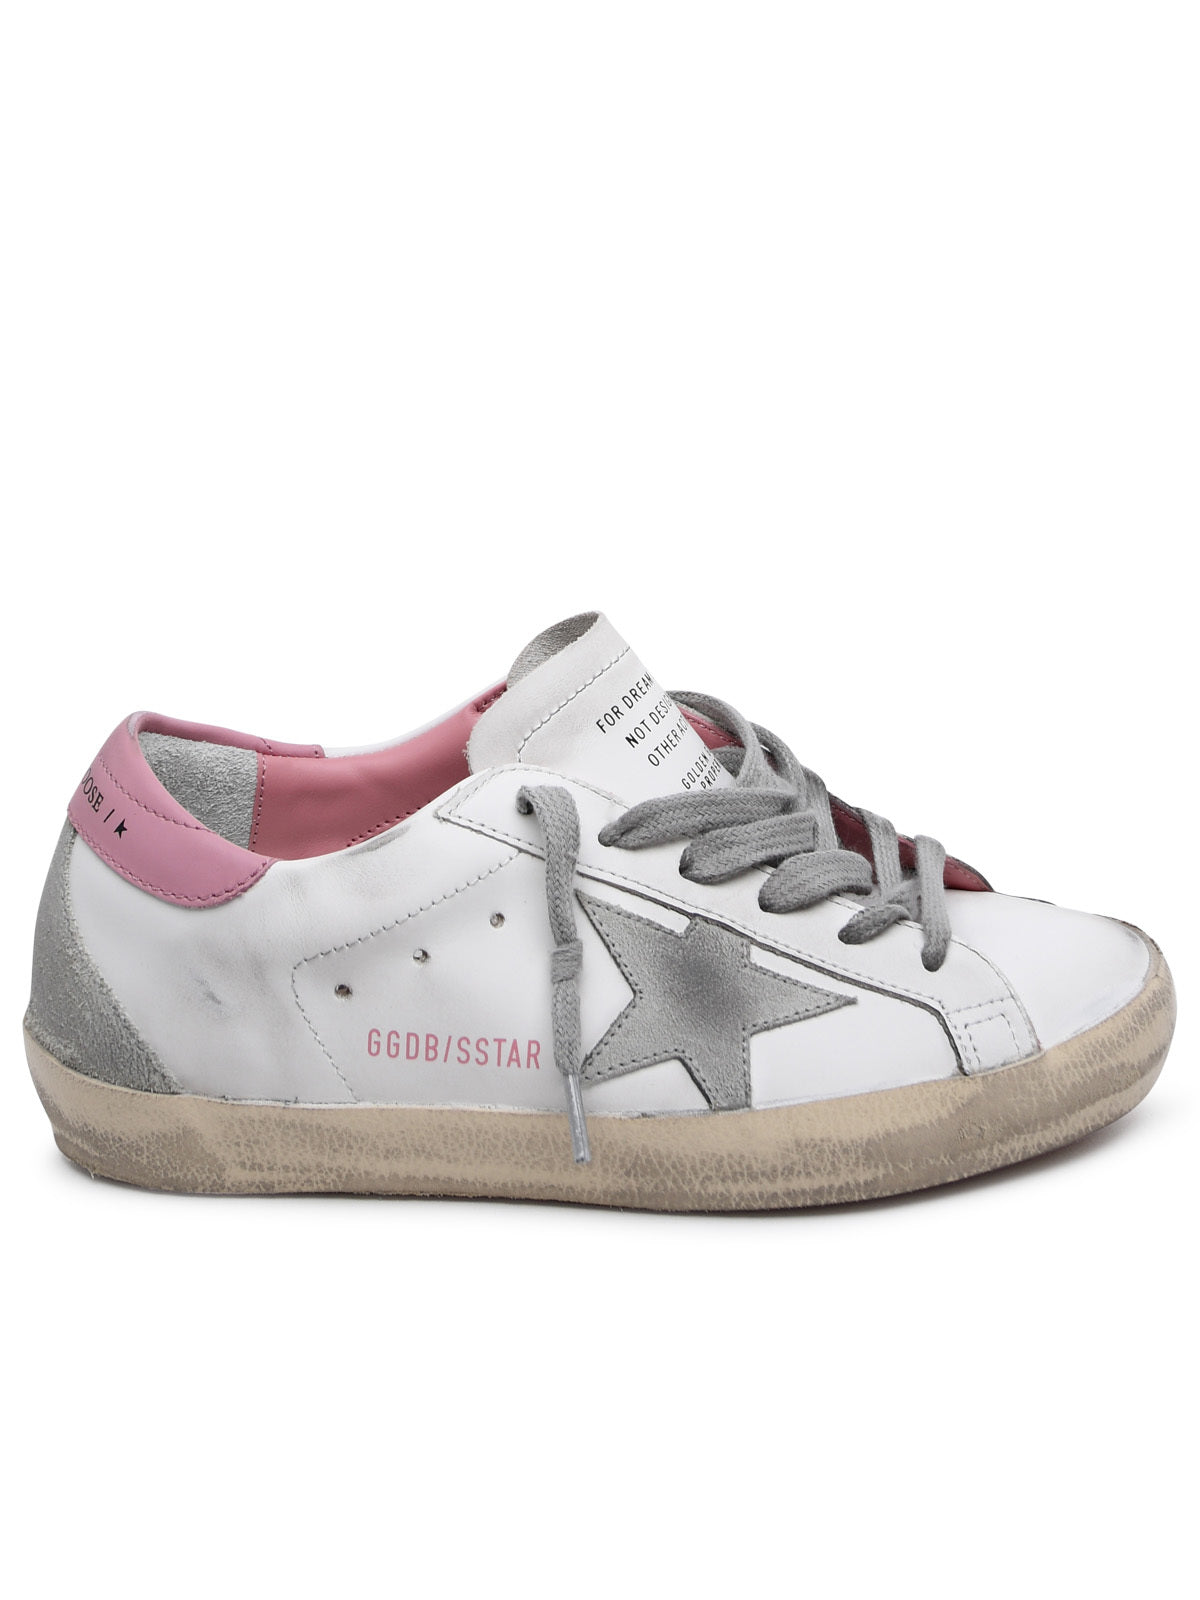 Golden Goose Woman White Leather Superstar Sneakers